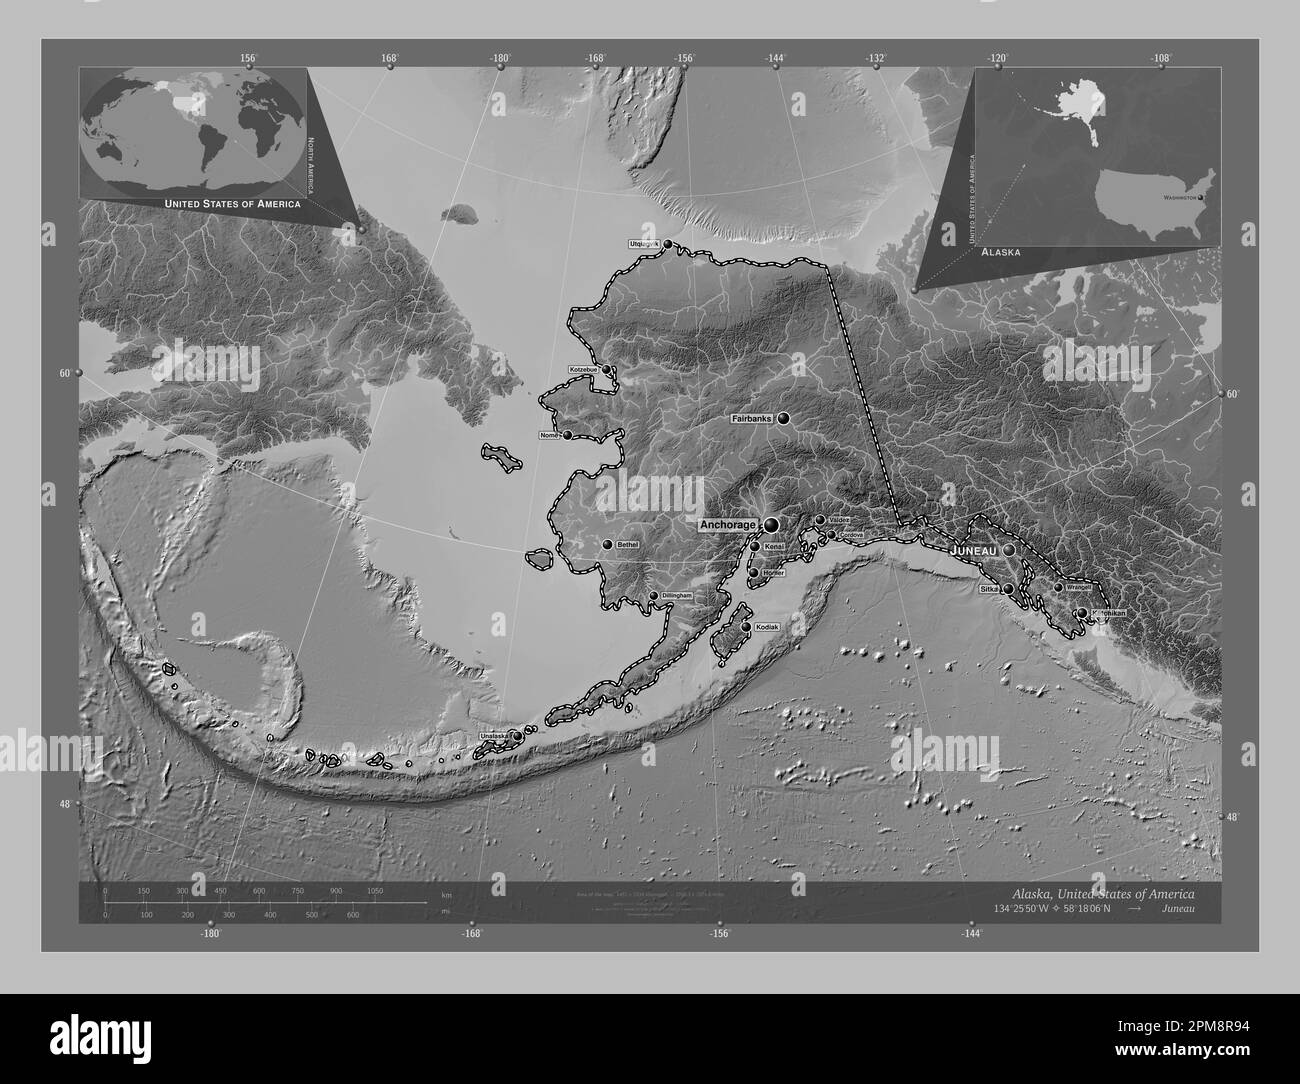 Alaska, state of United States of America. Grayscale elevation map with lakes and rivers. Locations and names of major cities of the region. Corner au Stock Photo